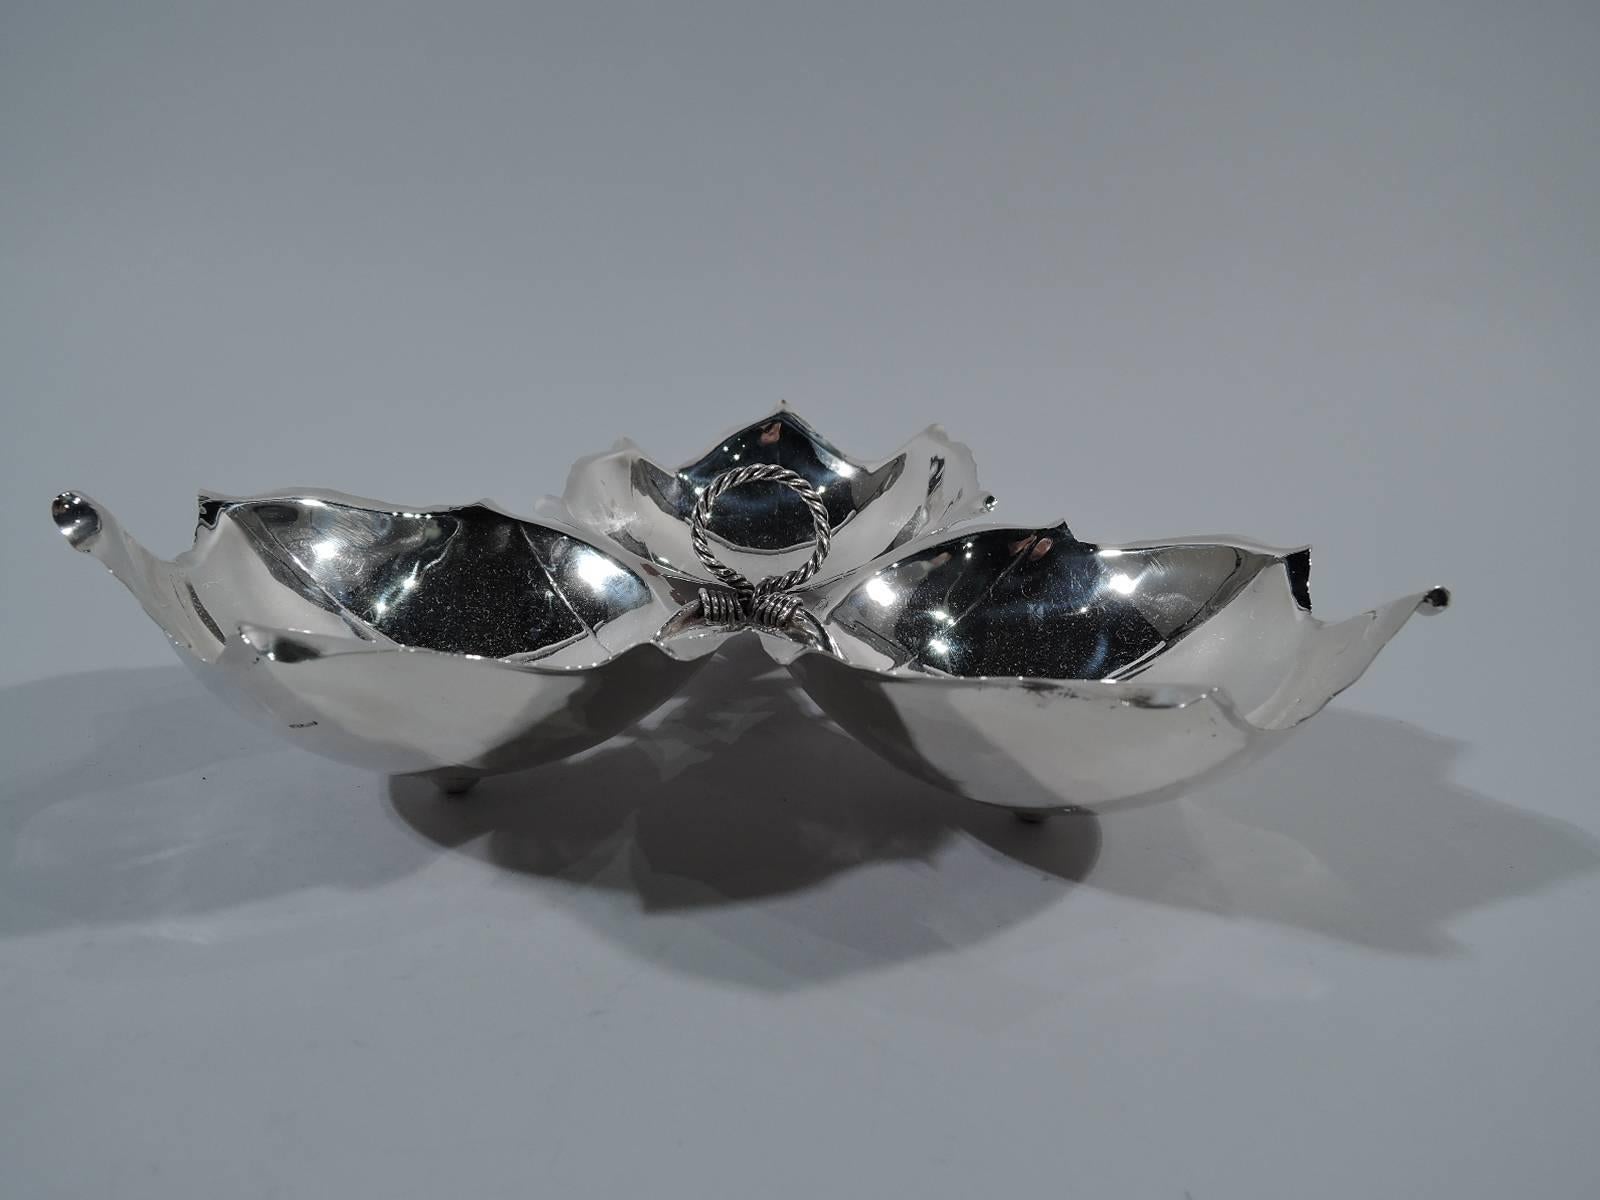 Sterling silver three-leaf dish. Made by Alfredo Sciarrotta in Newport, Rhode Island. Three leaf-form bowls with veins and irregular points tied together with wire. A Classic Midcentury design. Hallmark includes retailer’s name Shreve, Crump & Low,